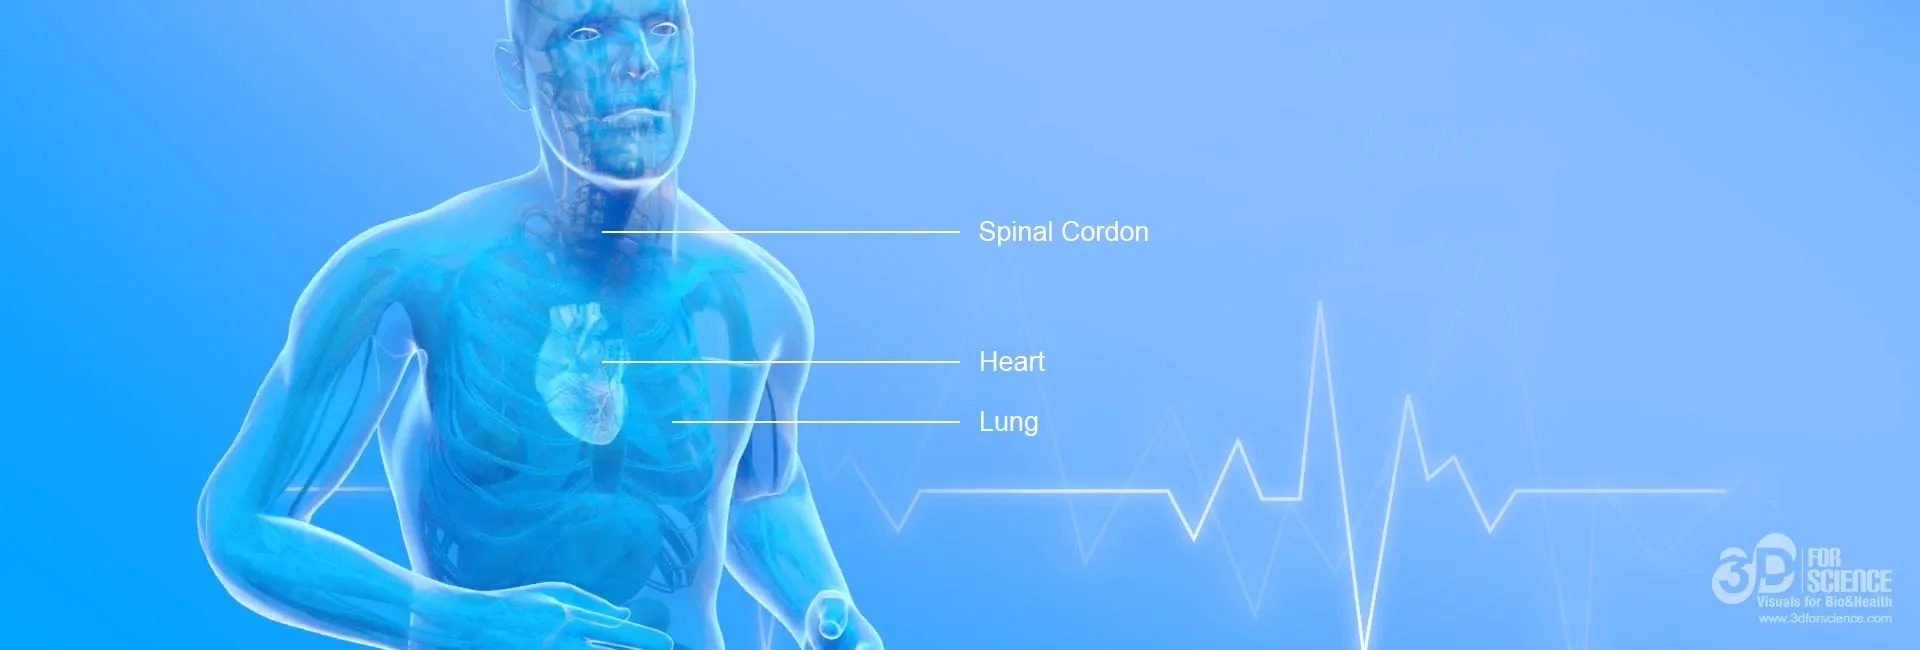 medical illustration showing cardiac frequency